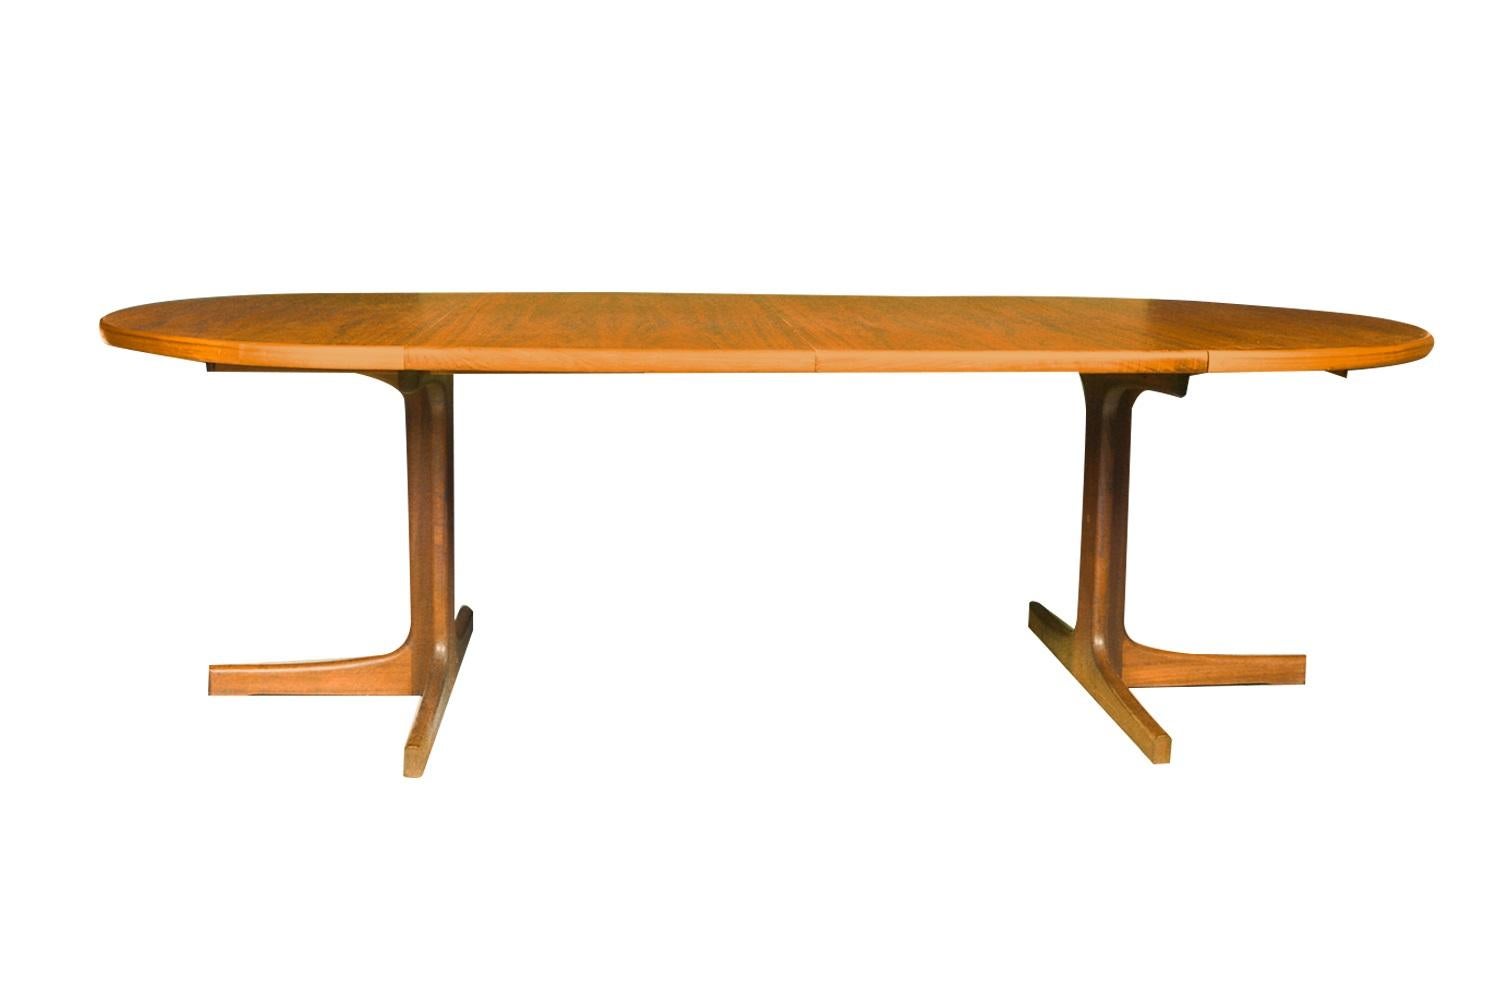 Beautiful Mid-Century Modern expandable round dining table designed by Niels Koefoed for Koefoeds Hornslet, model “Lis” made in Denmark, circa 1960s. This stunning teak dining table features richly grained, gleaming teak and smooth, clean lines